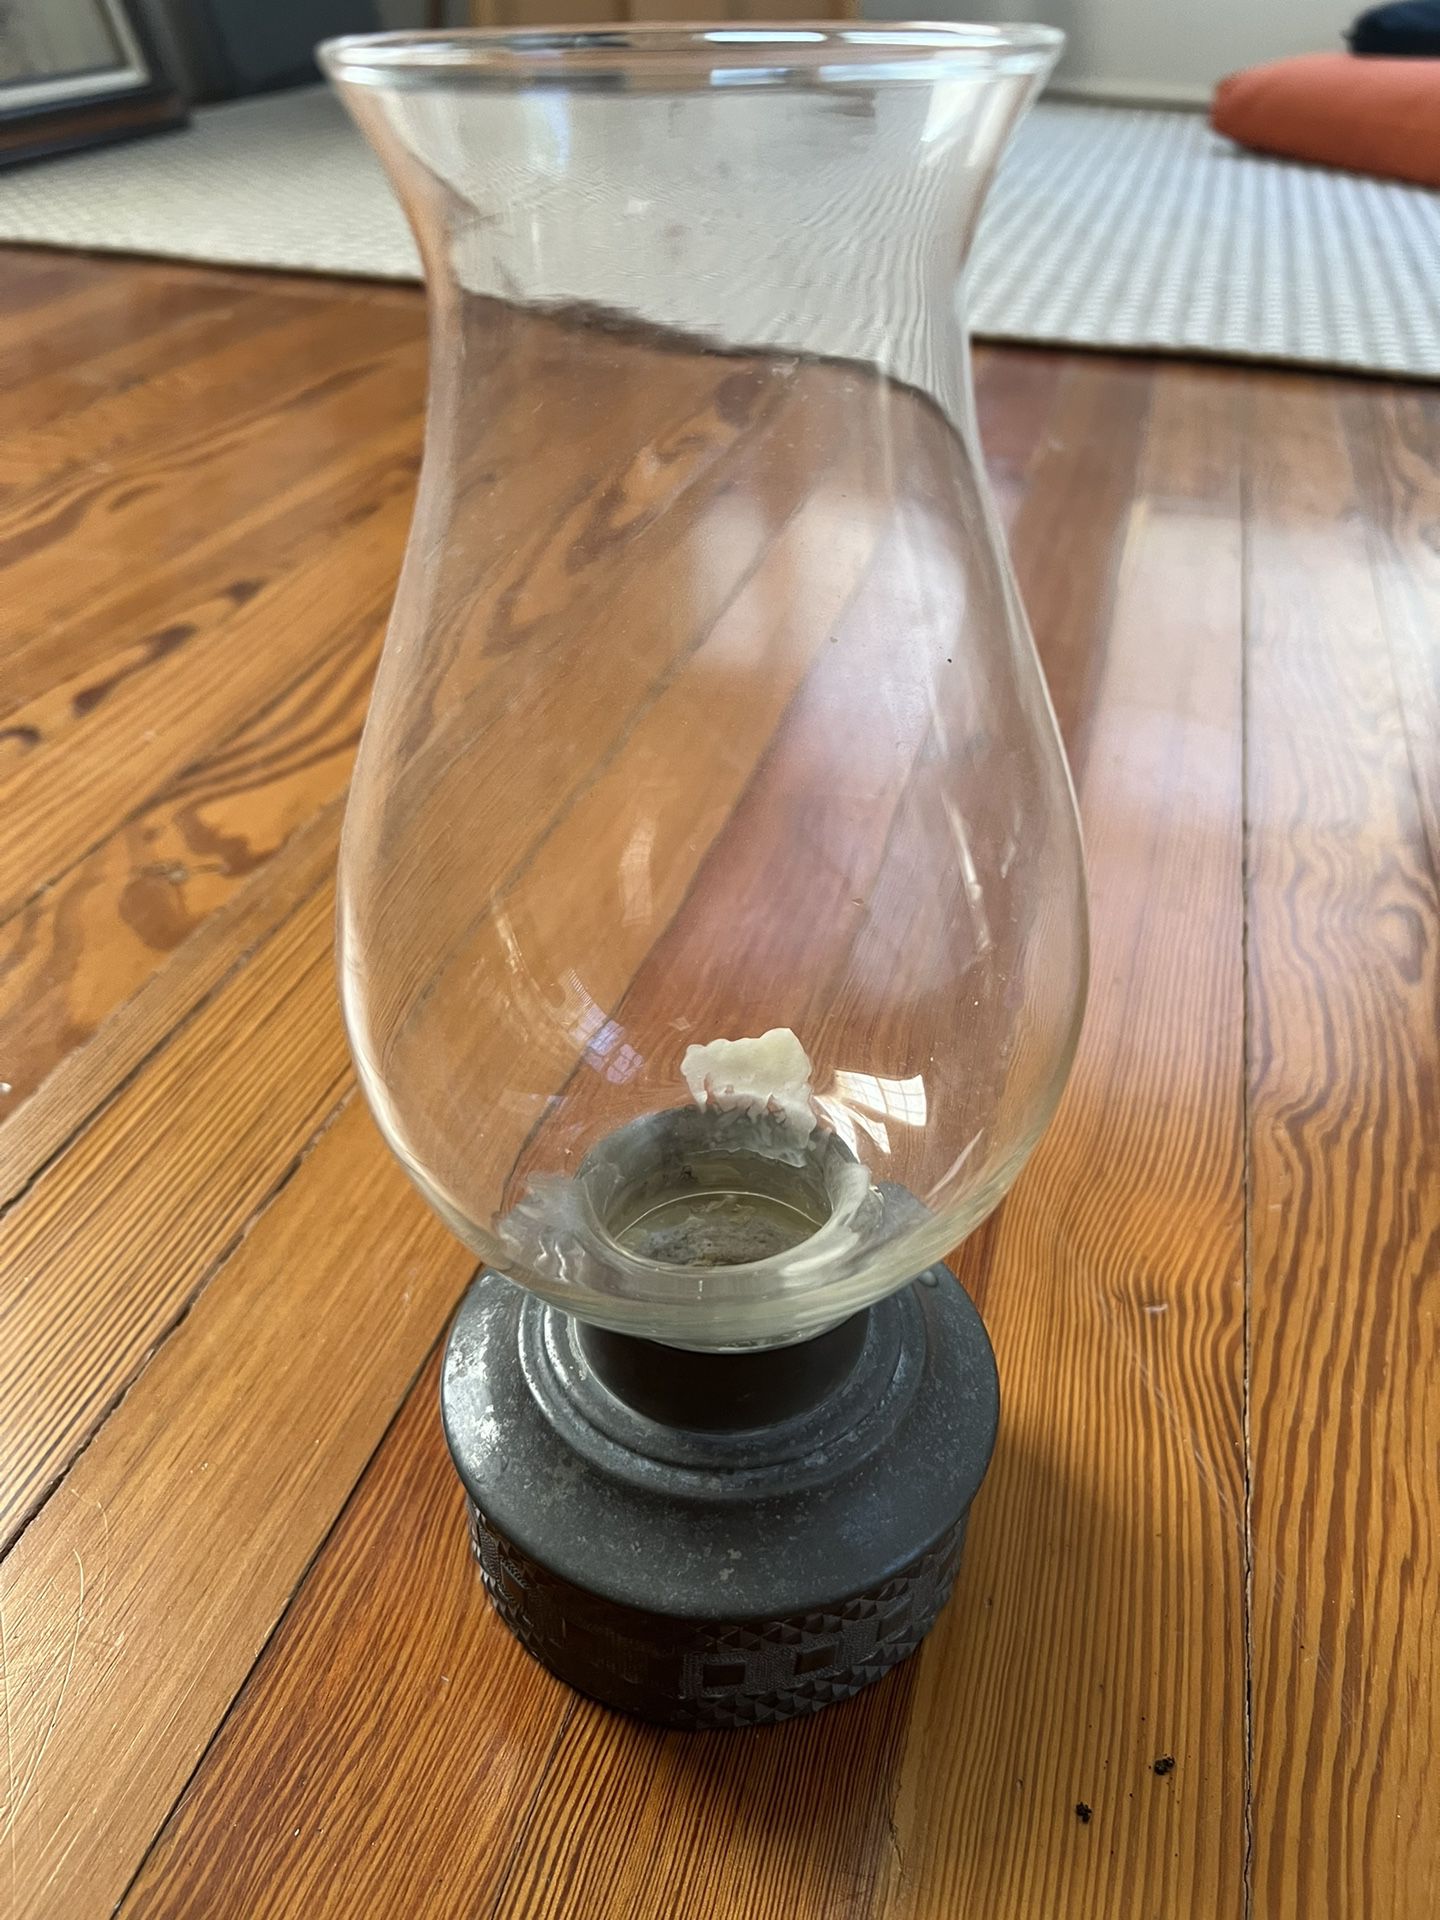 Pewter Candle Holder With Hurricane Glass